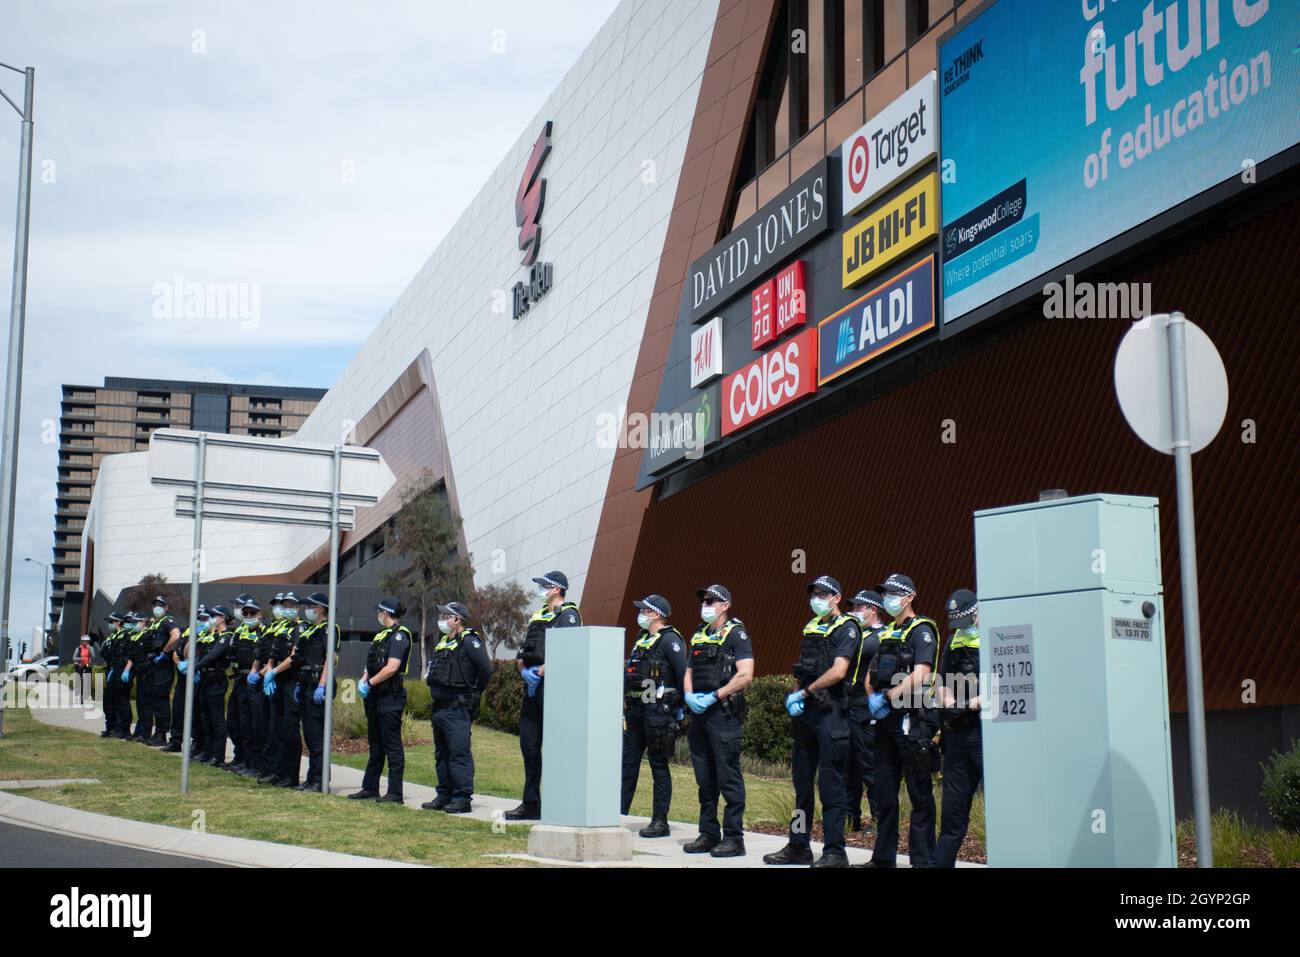 Melbourne, Australia, 9th October 2021. Police line up outside The Glen shopping center, ready to move in on a roadside anti-lockdown protest. Credit: Jay Kogler/Alamy Live News Stock Photo